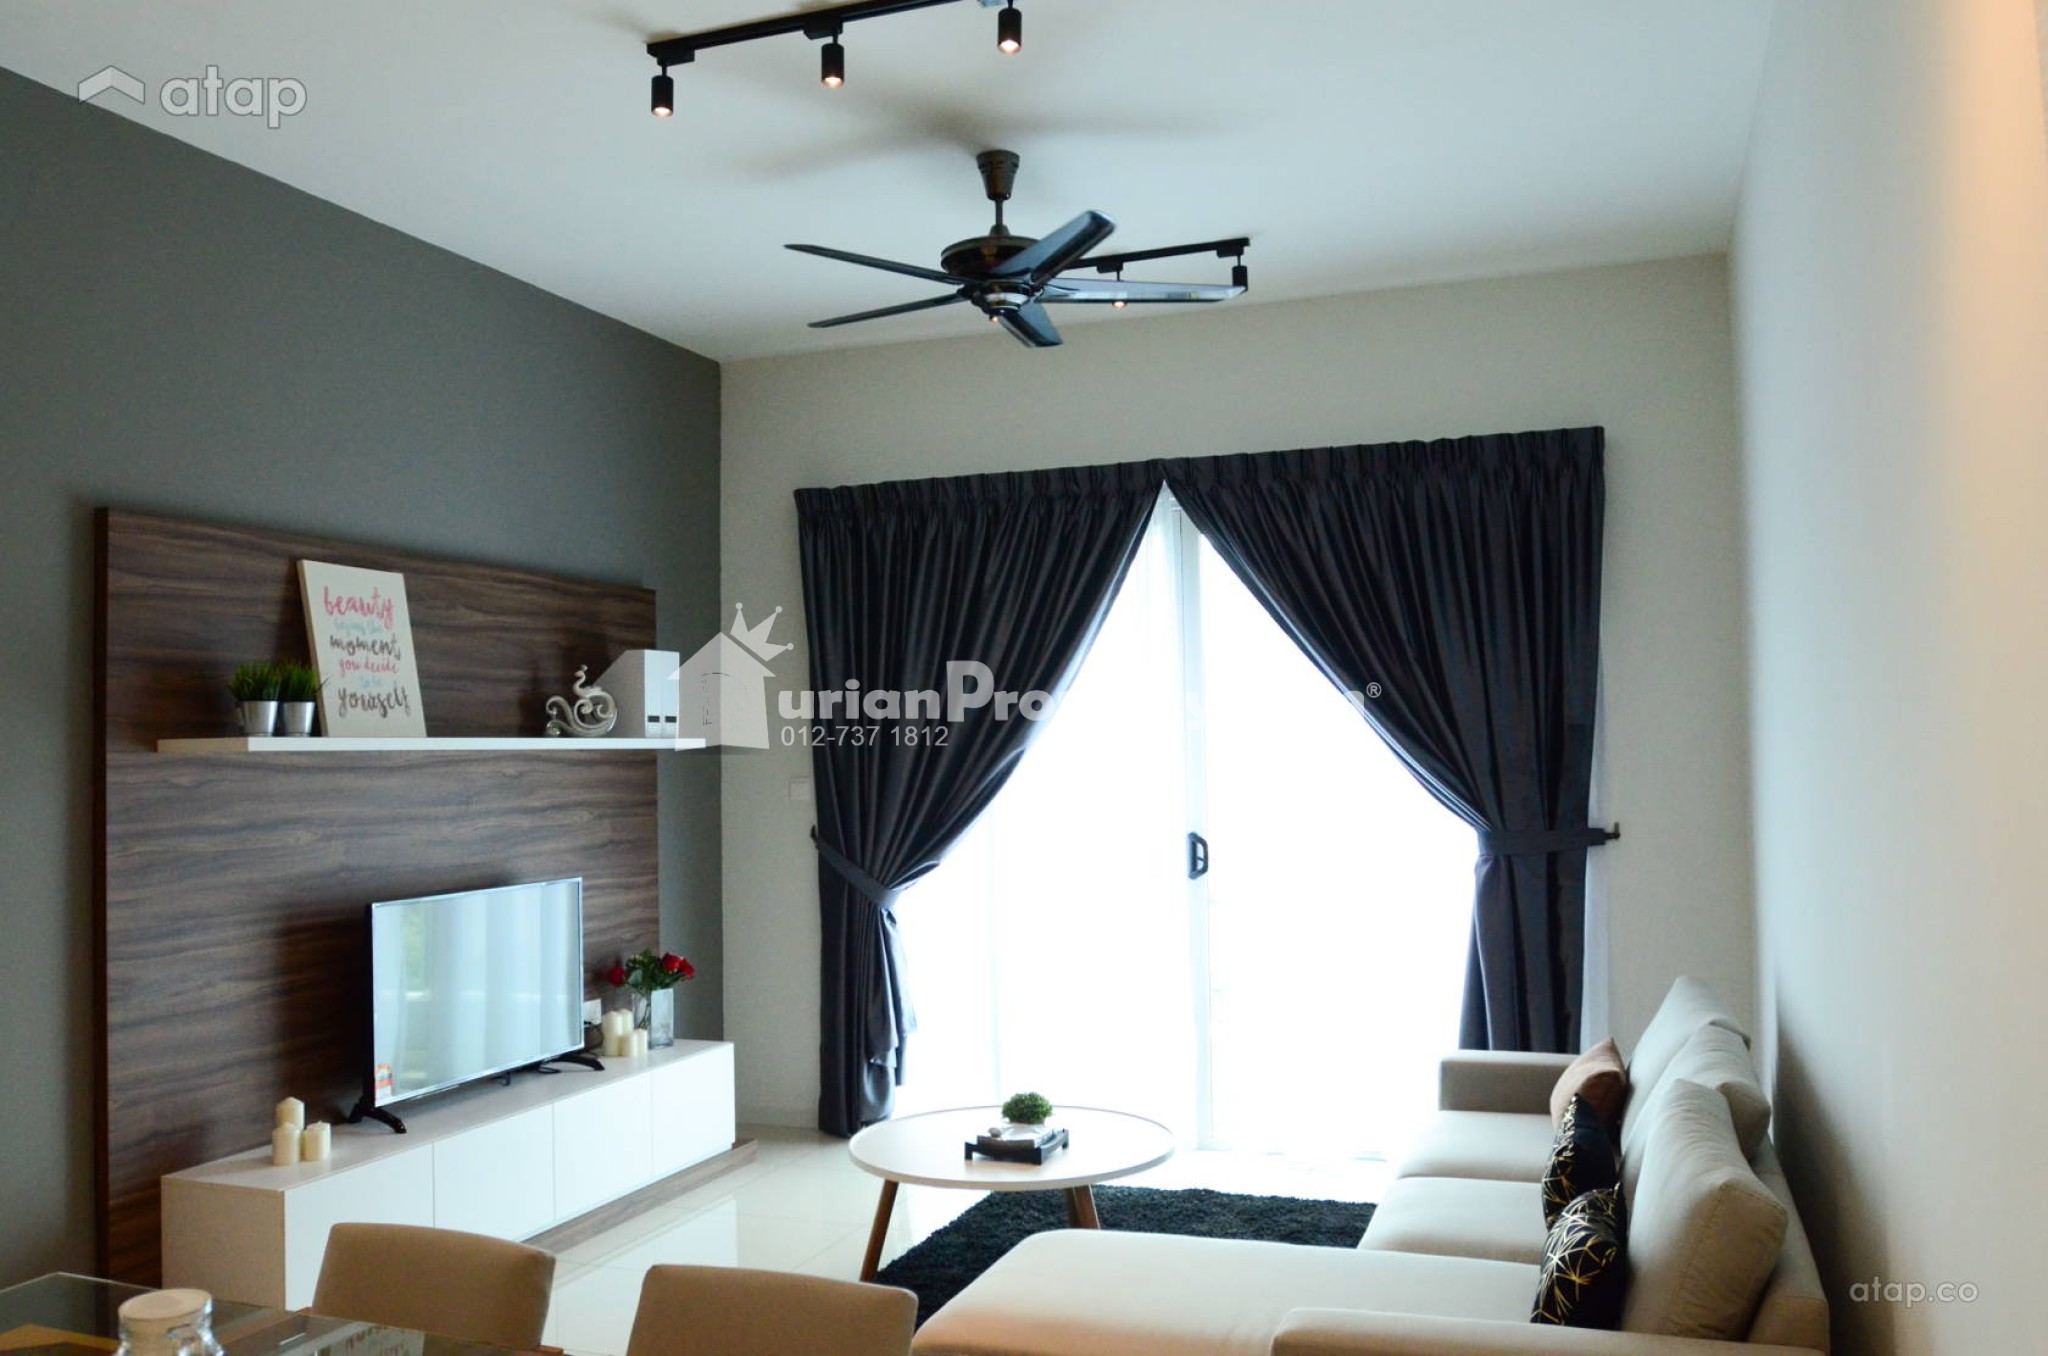 Condo For Rent at Sunway Geo Residences